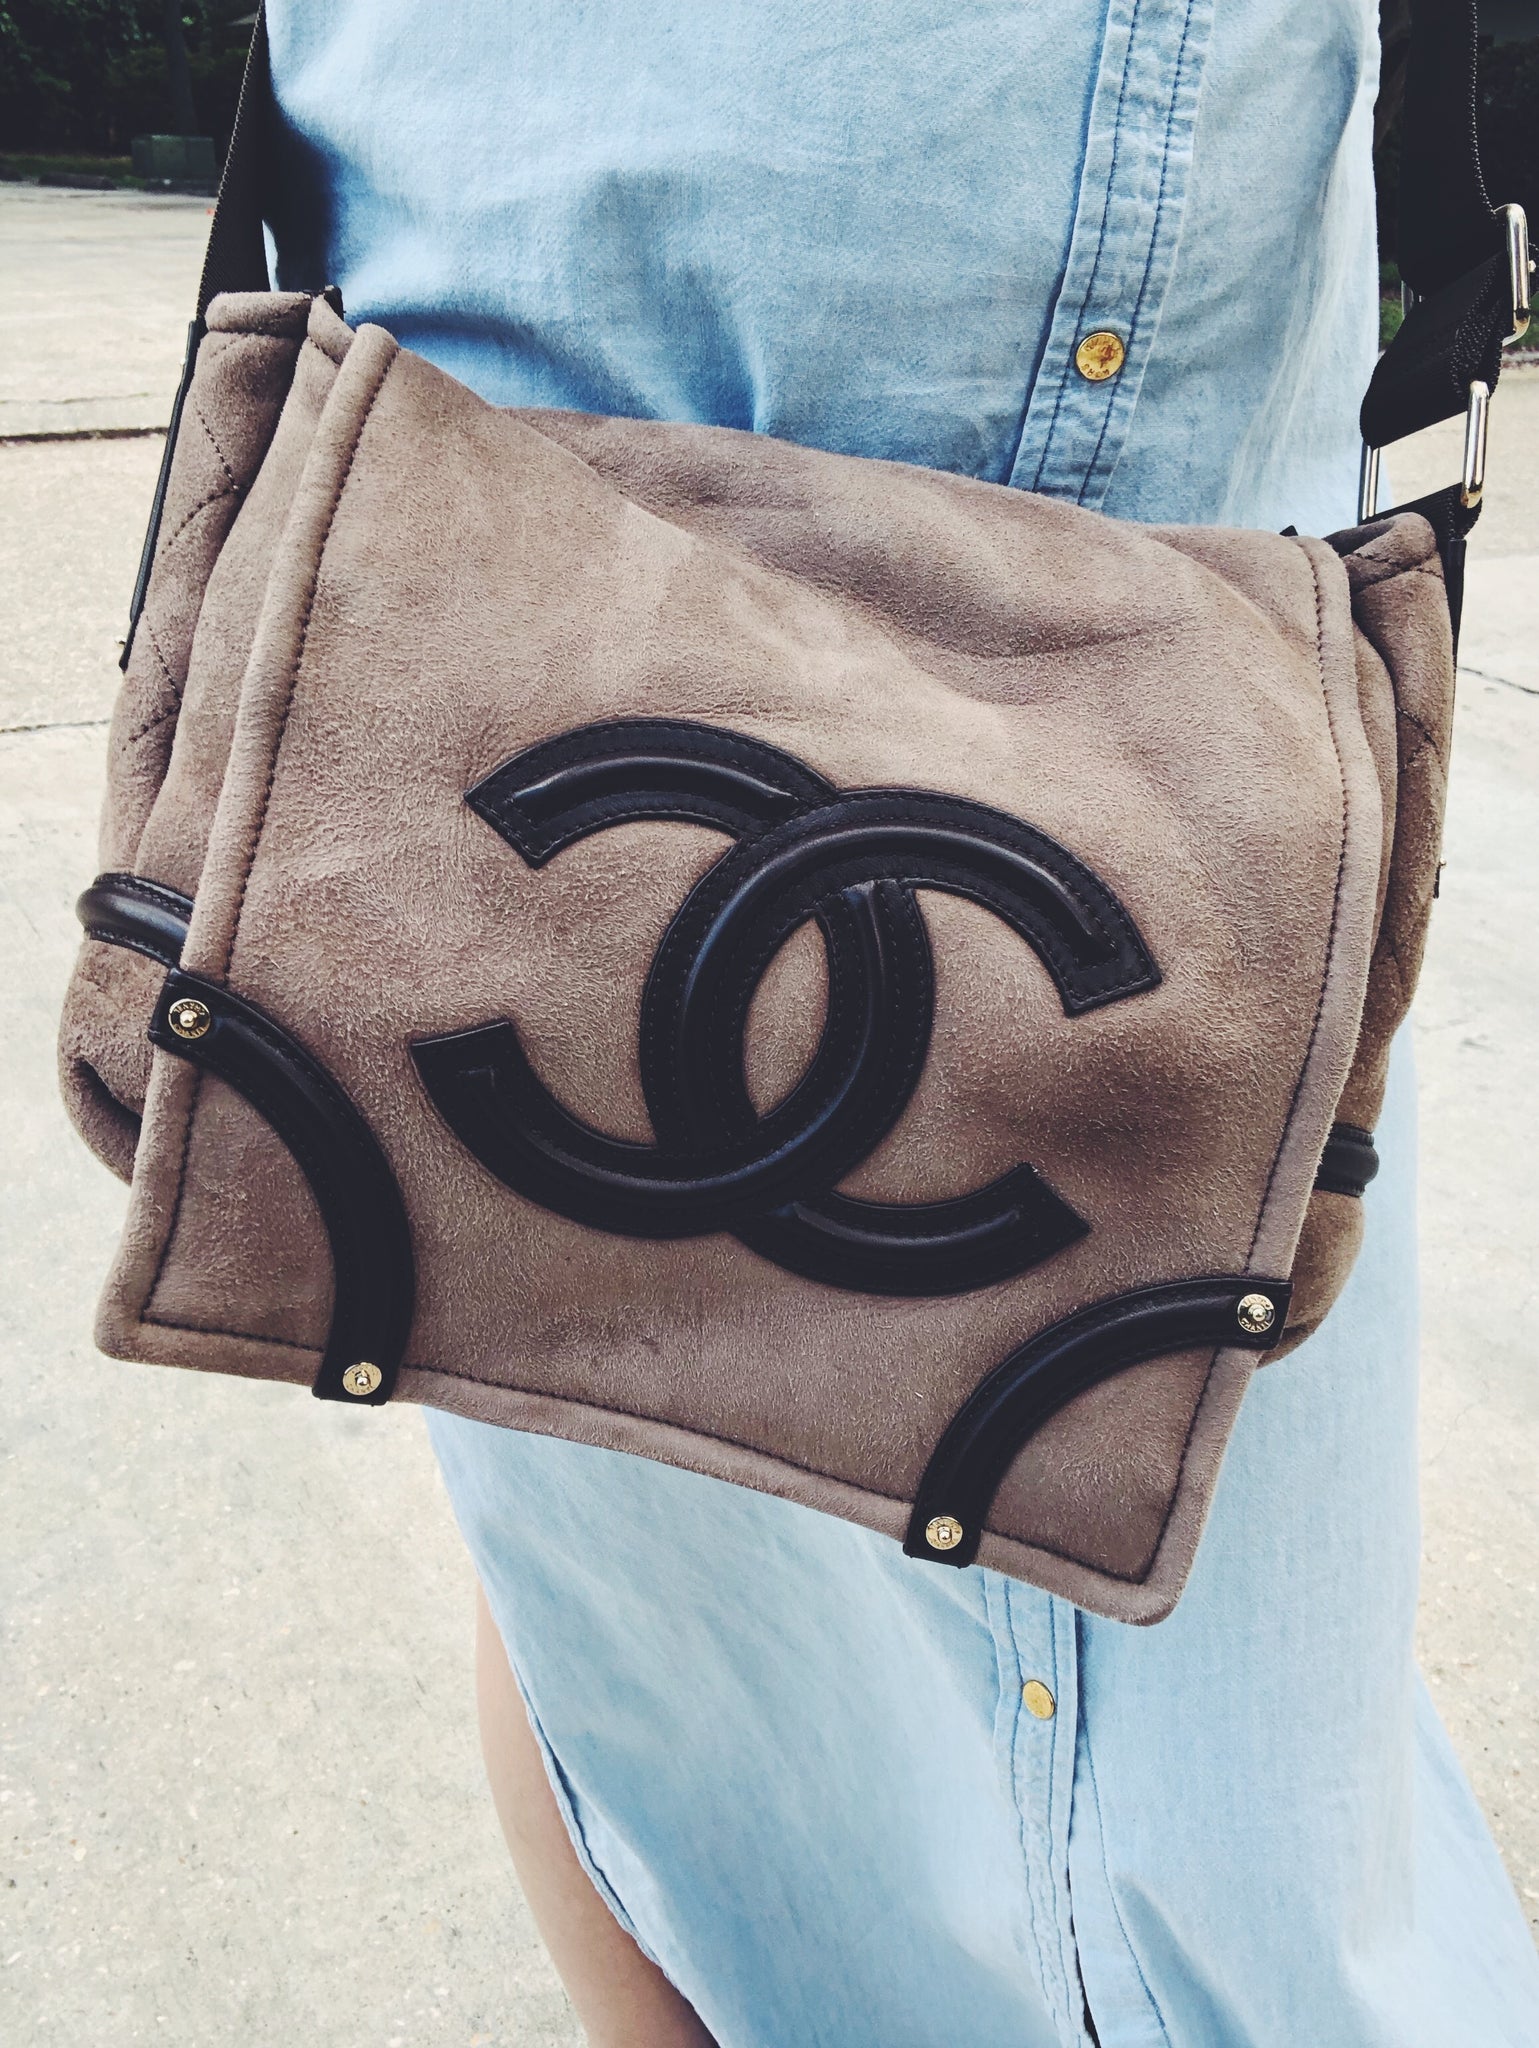 Chanel Precision VIP Bag  Which one is Real? 